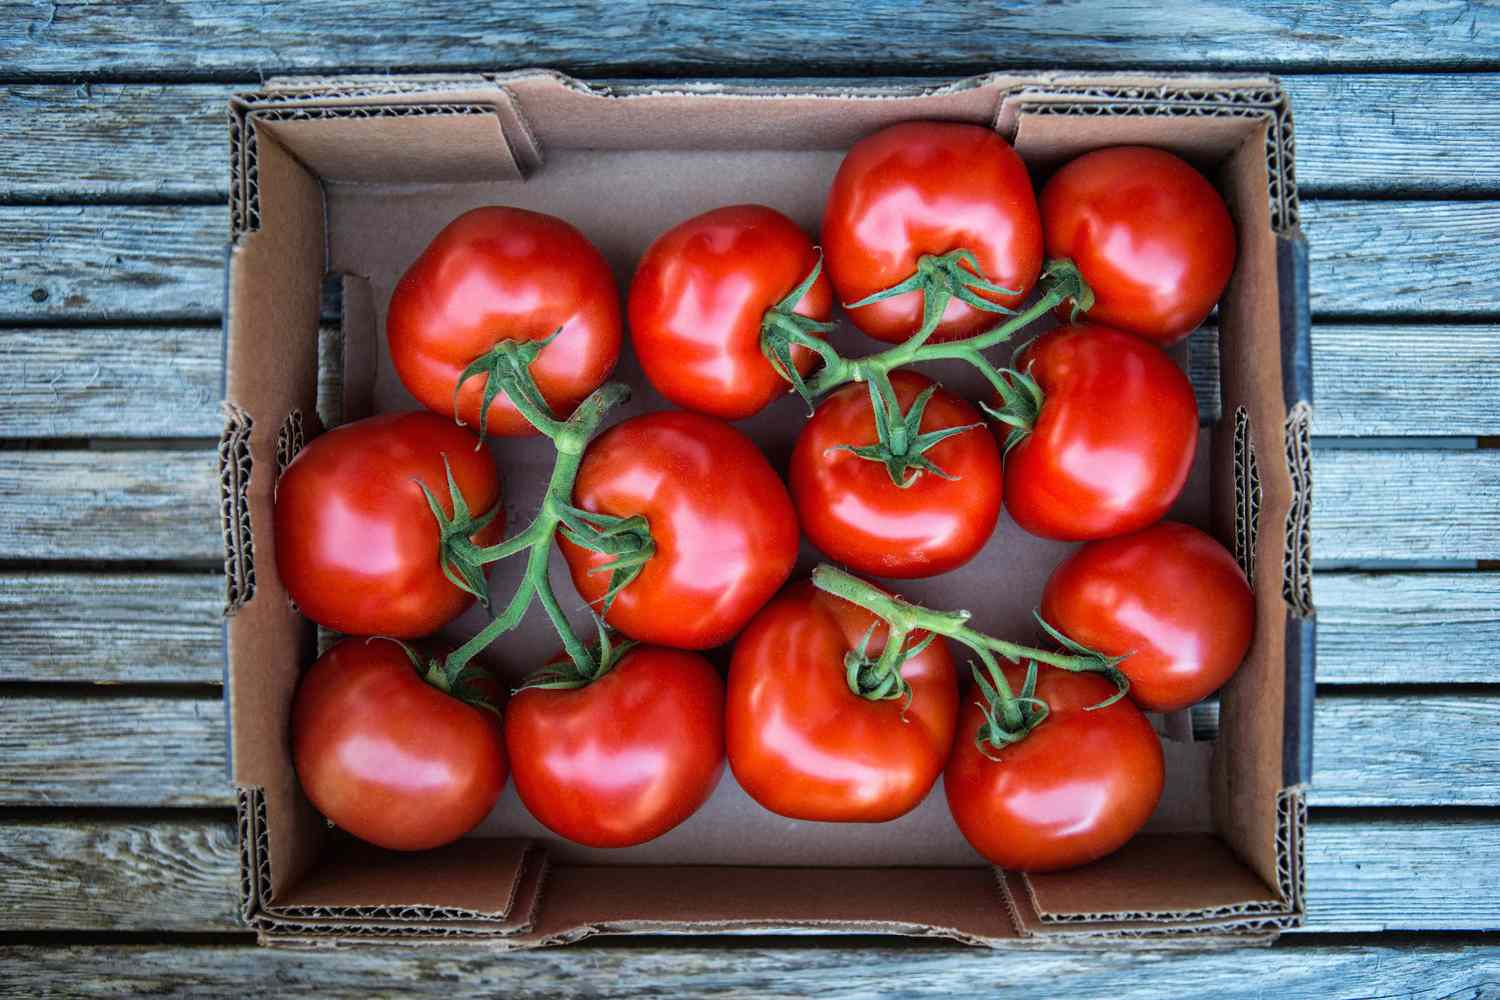 How To Store Tomatoes To Last Longer